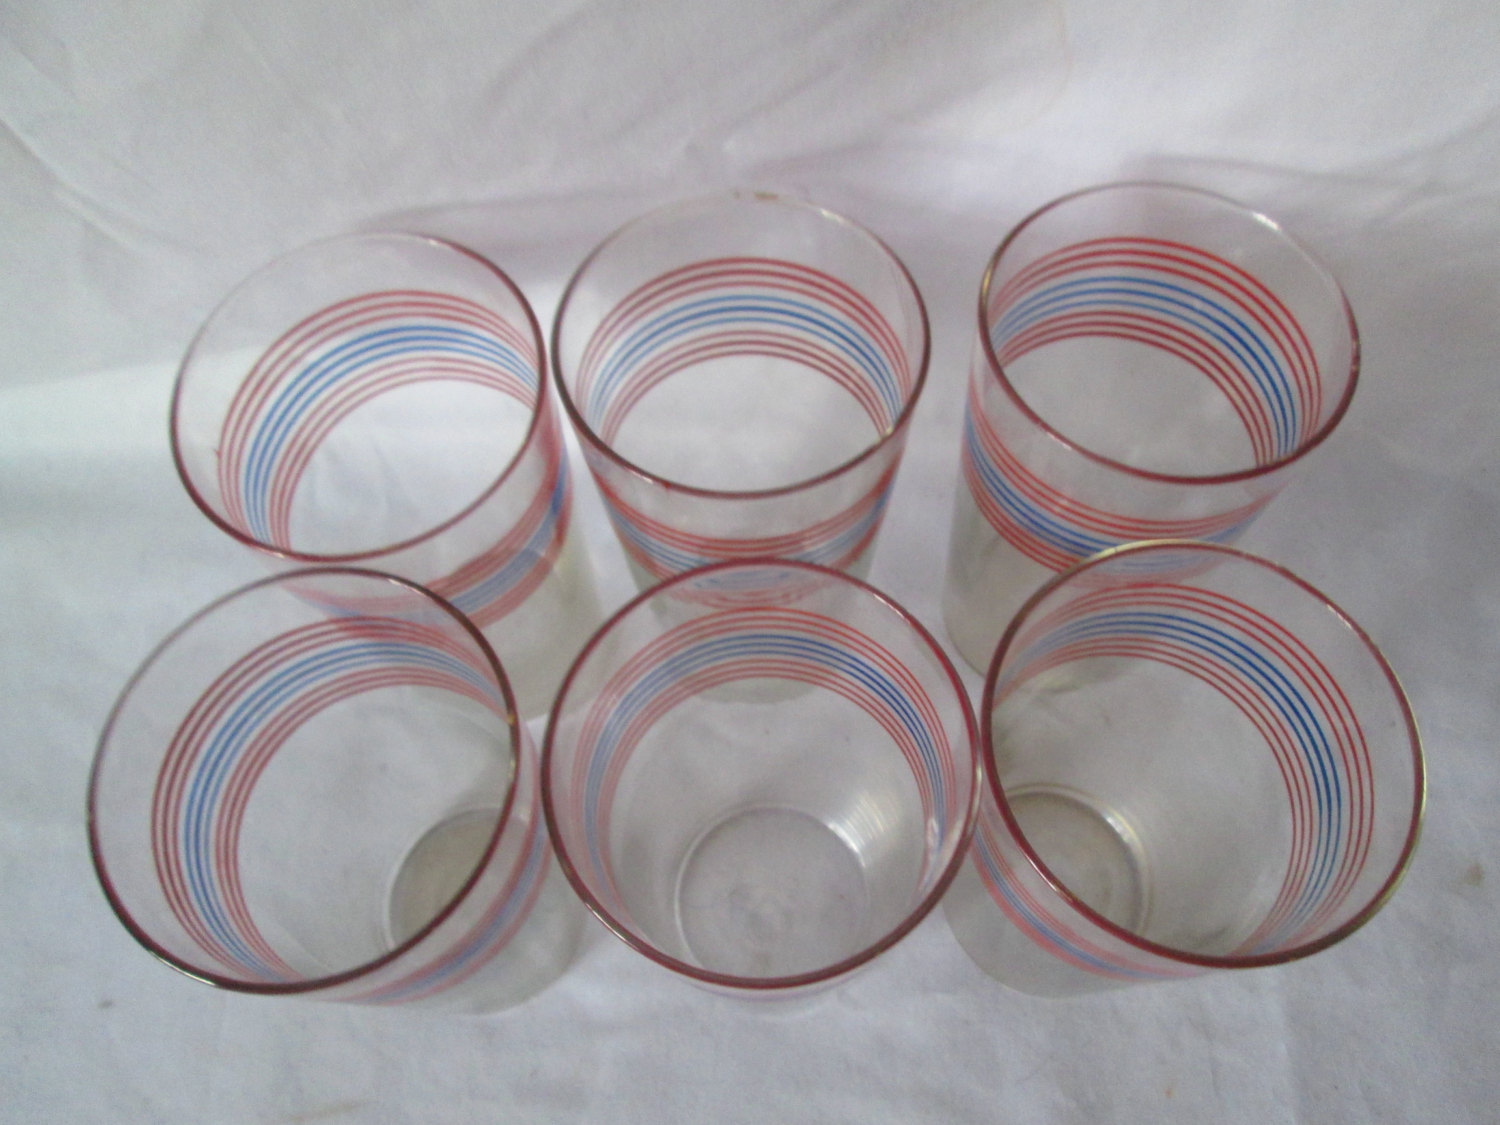 https://www.truevintageantiques.com/wp-content/uploads/2017/06/vintage-1950s-horizontal-striped-red-and-blue-on-clear-glass-tumblers-water-glasses-set-of-6-iced-tea-large-tumblers-59497ad82.jpg